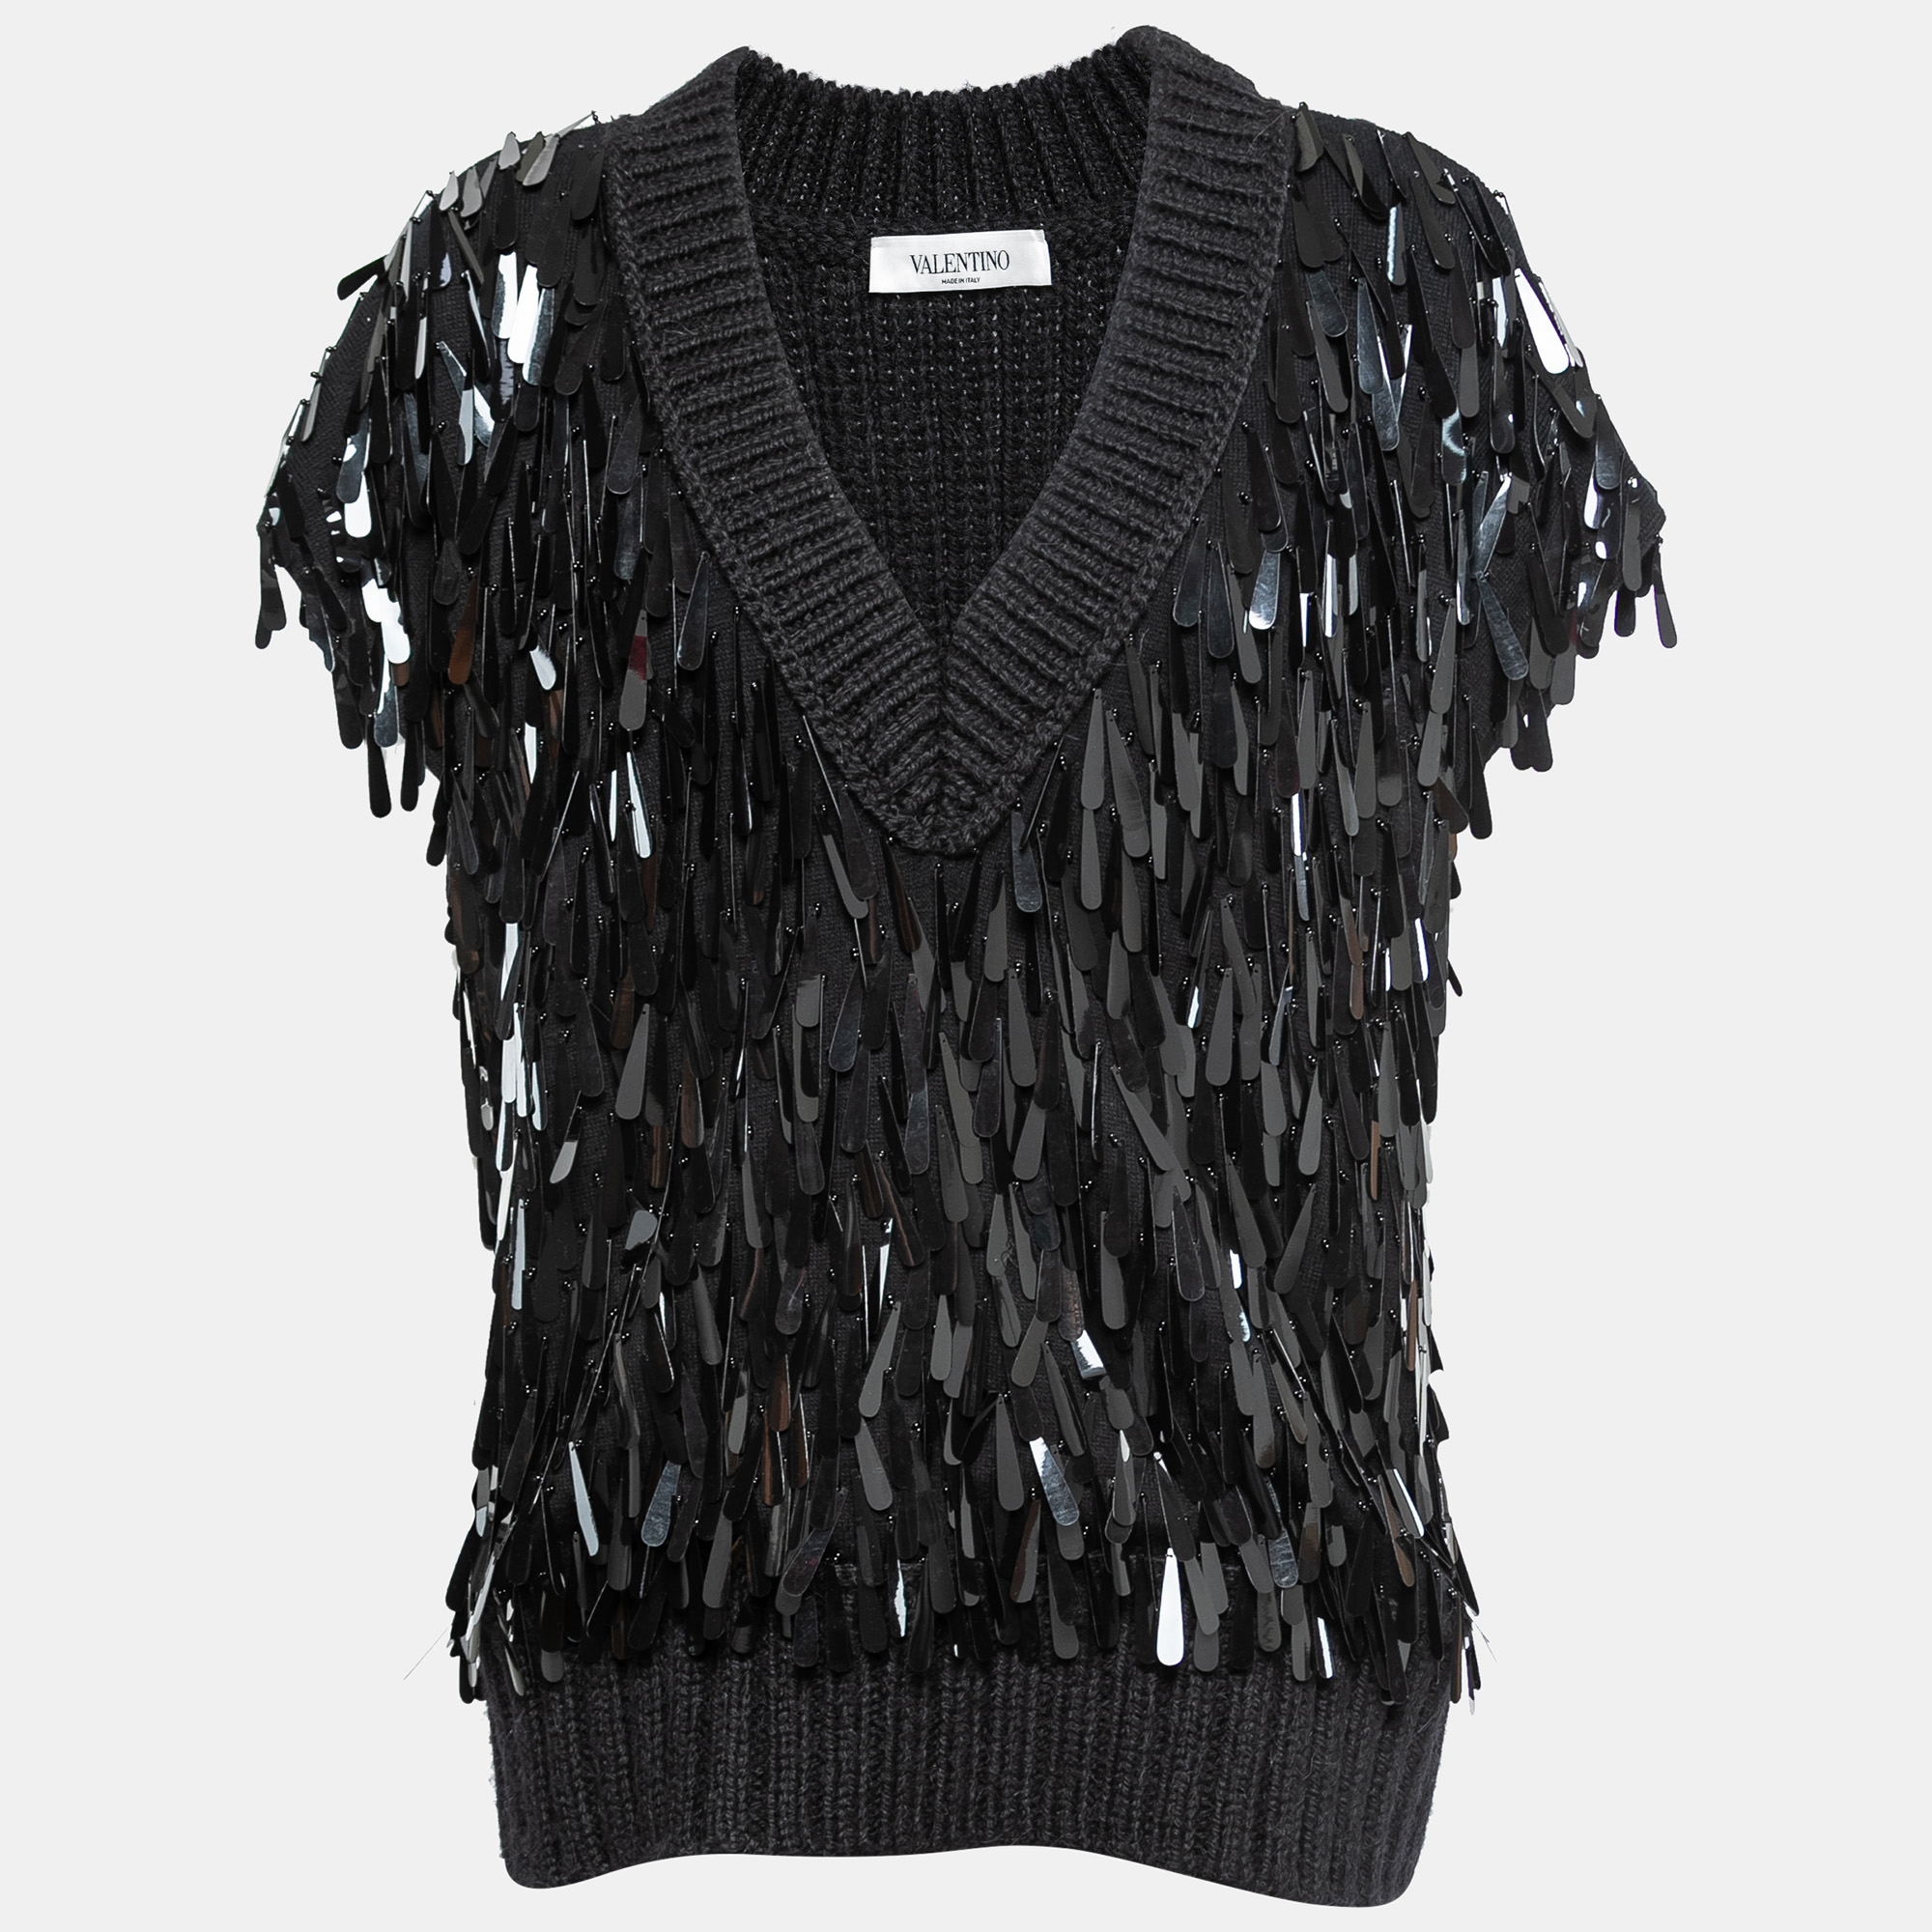 Pre-owned Valentino Black Sequin Embellished Wool Sweater Vest S